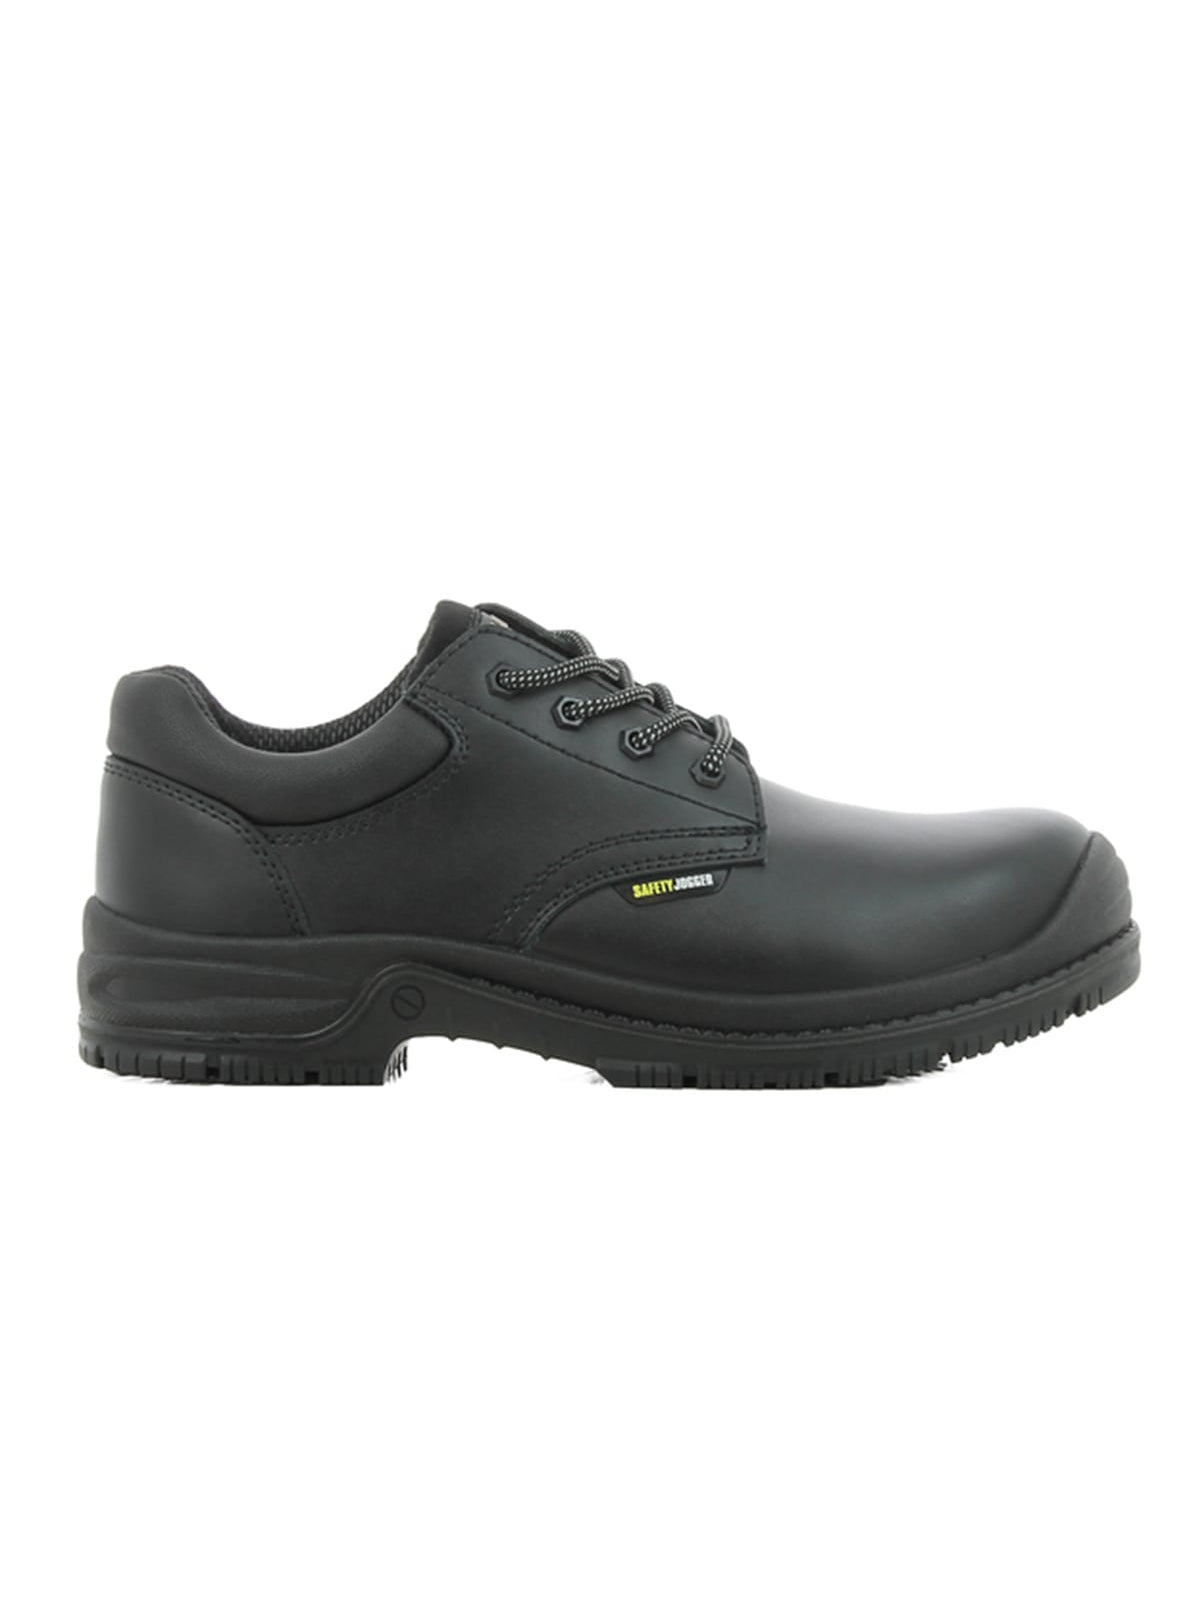 Unisex Safety Shoe X111081 (S3) by Shoes For Crews -  ChefsCotton